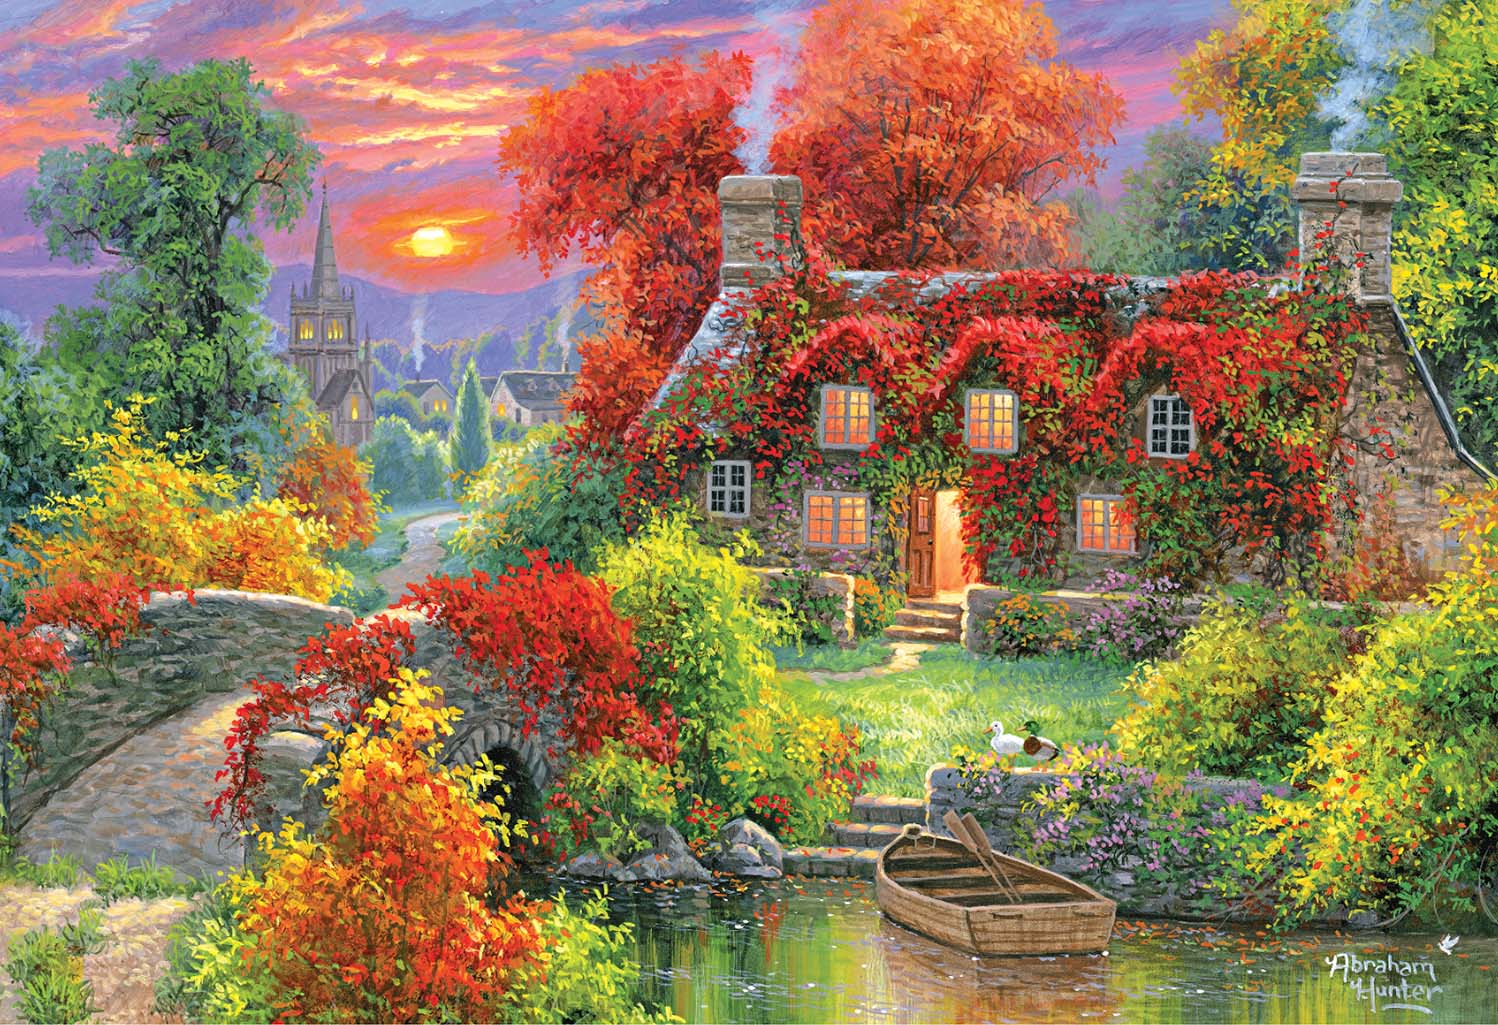 A Place To Be Still Lakes & Rivers Jigsaw Puzzle